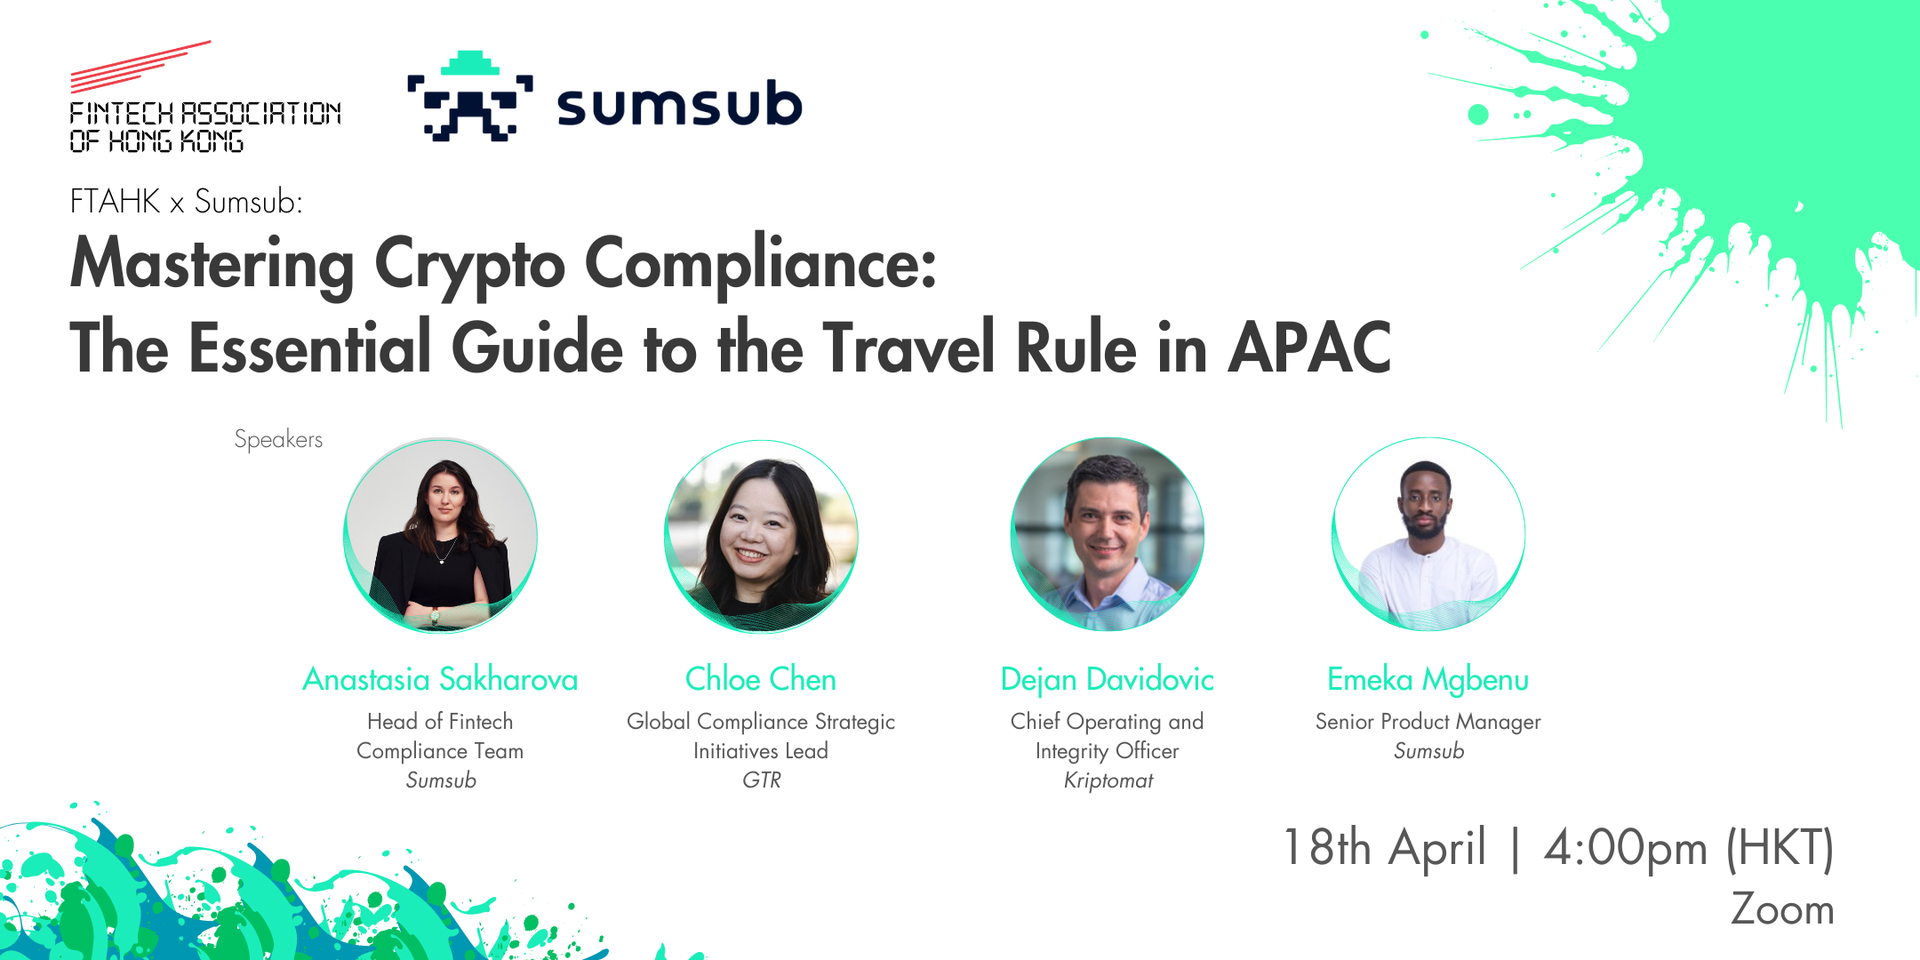 thumbnails FTAHK x Sumsub: Mastering Crypto Compliance - The Essential Guide to the Travel Rule in APAC